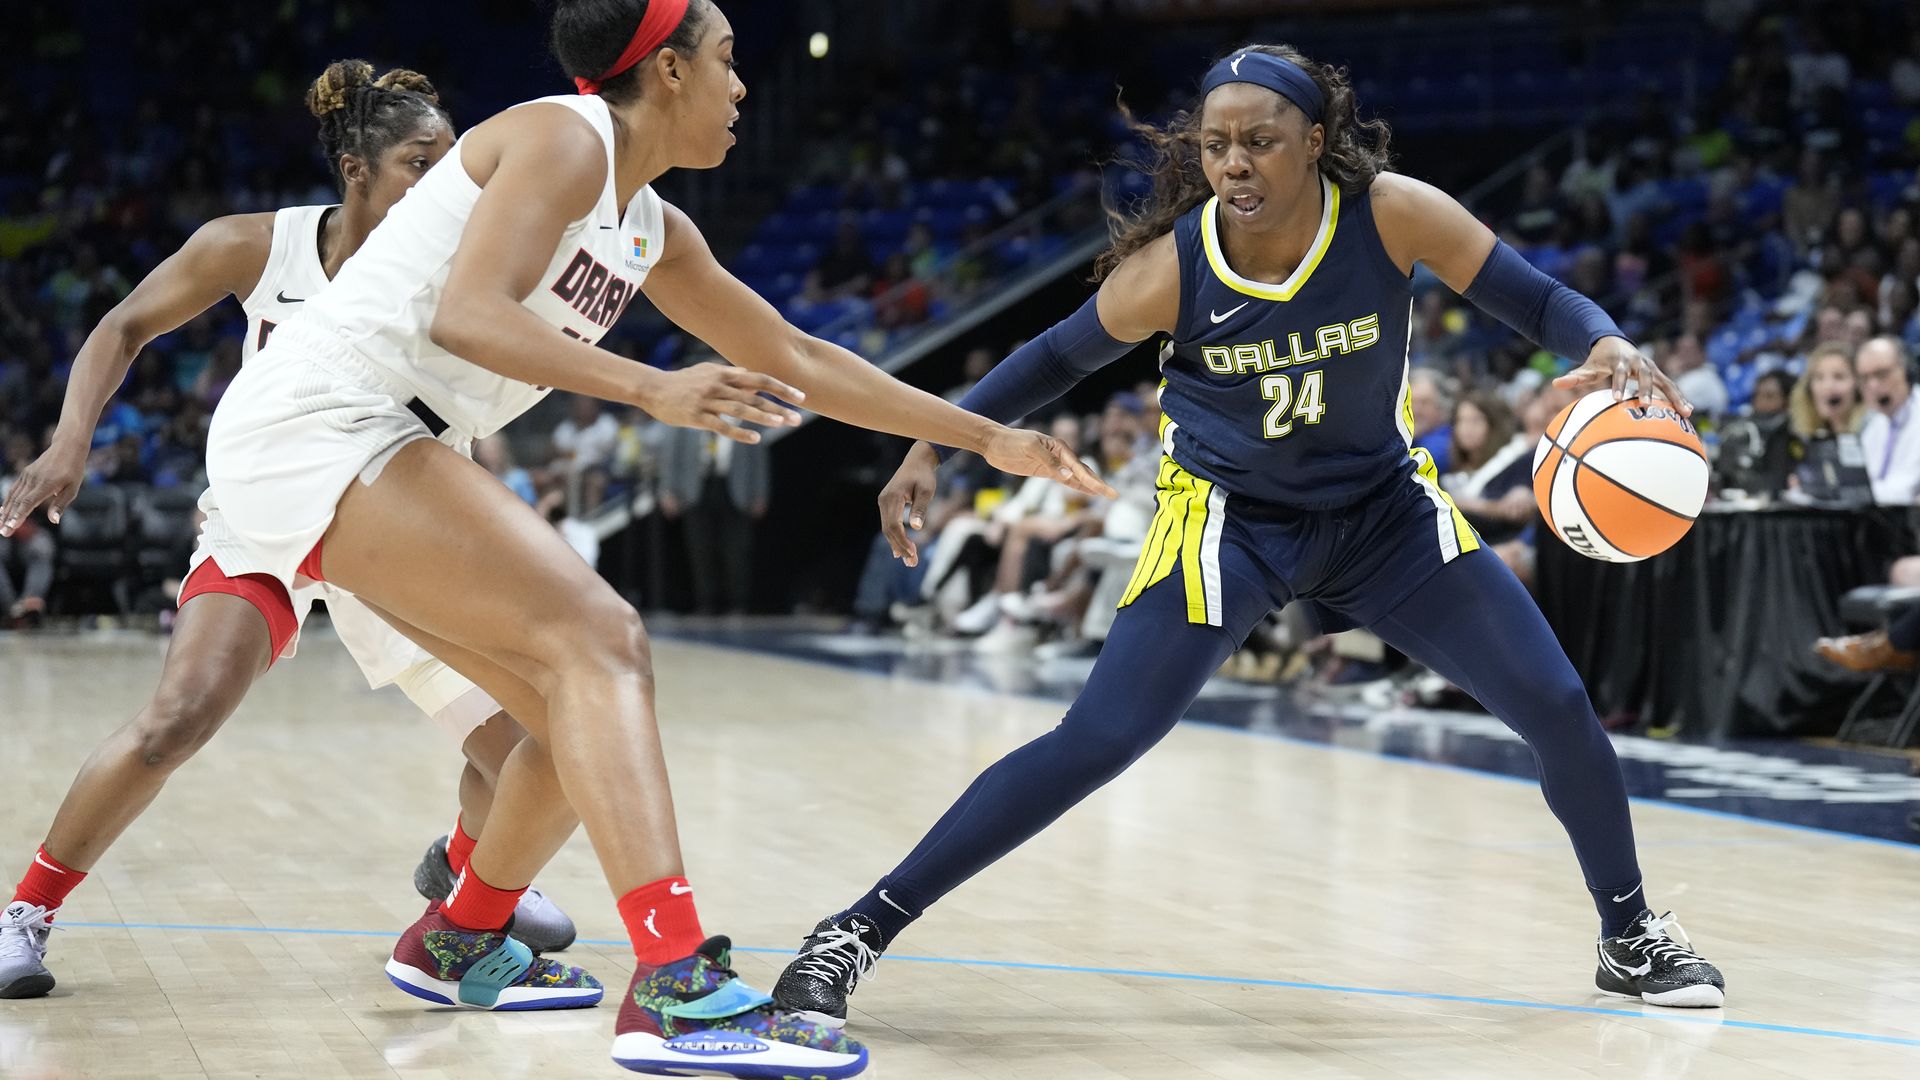 Arike Ogunbowale #24 of the Dallas Wings handles the ball during the game against the Atlanta Dream 